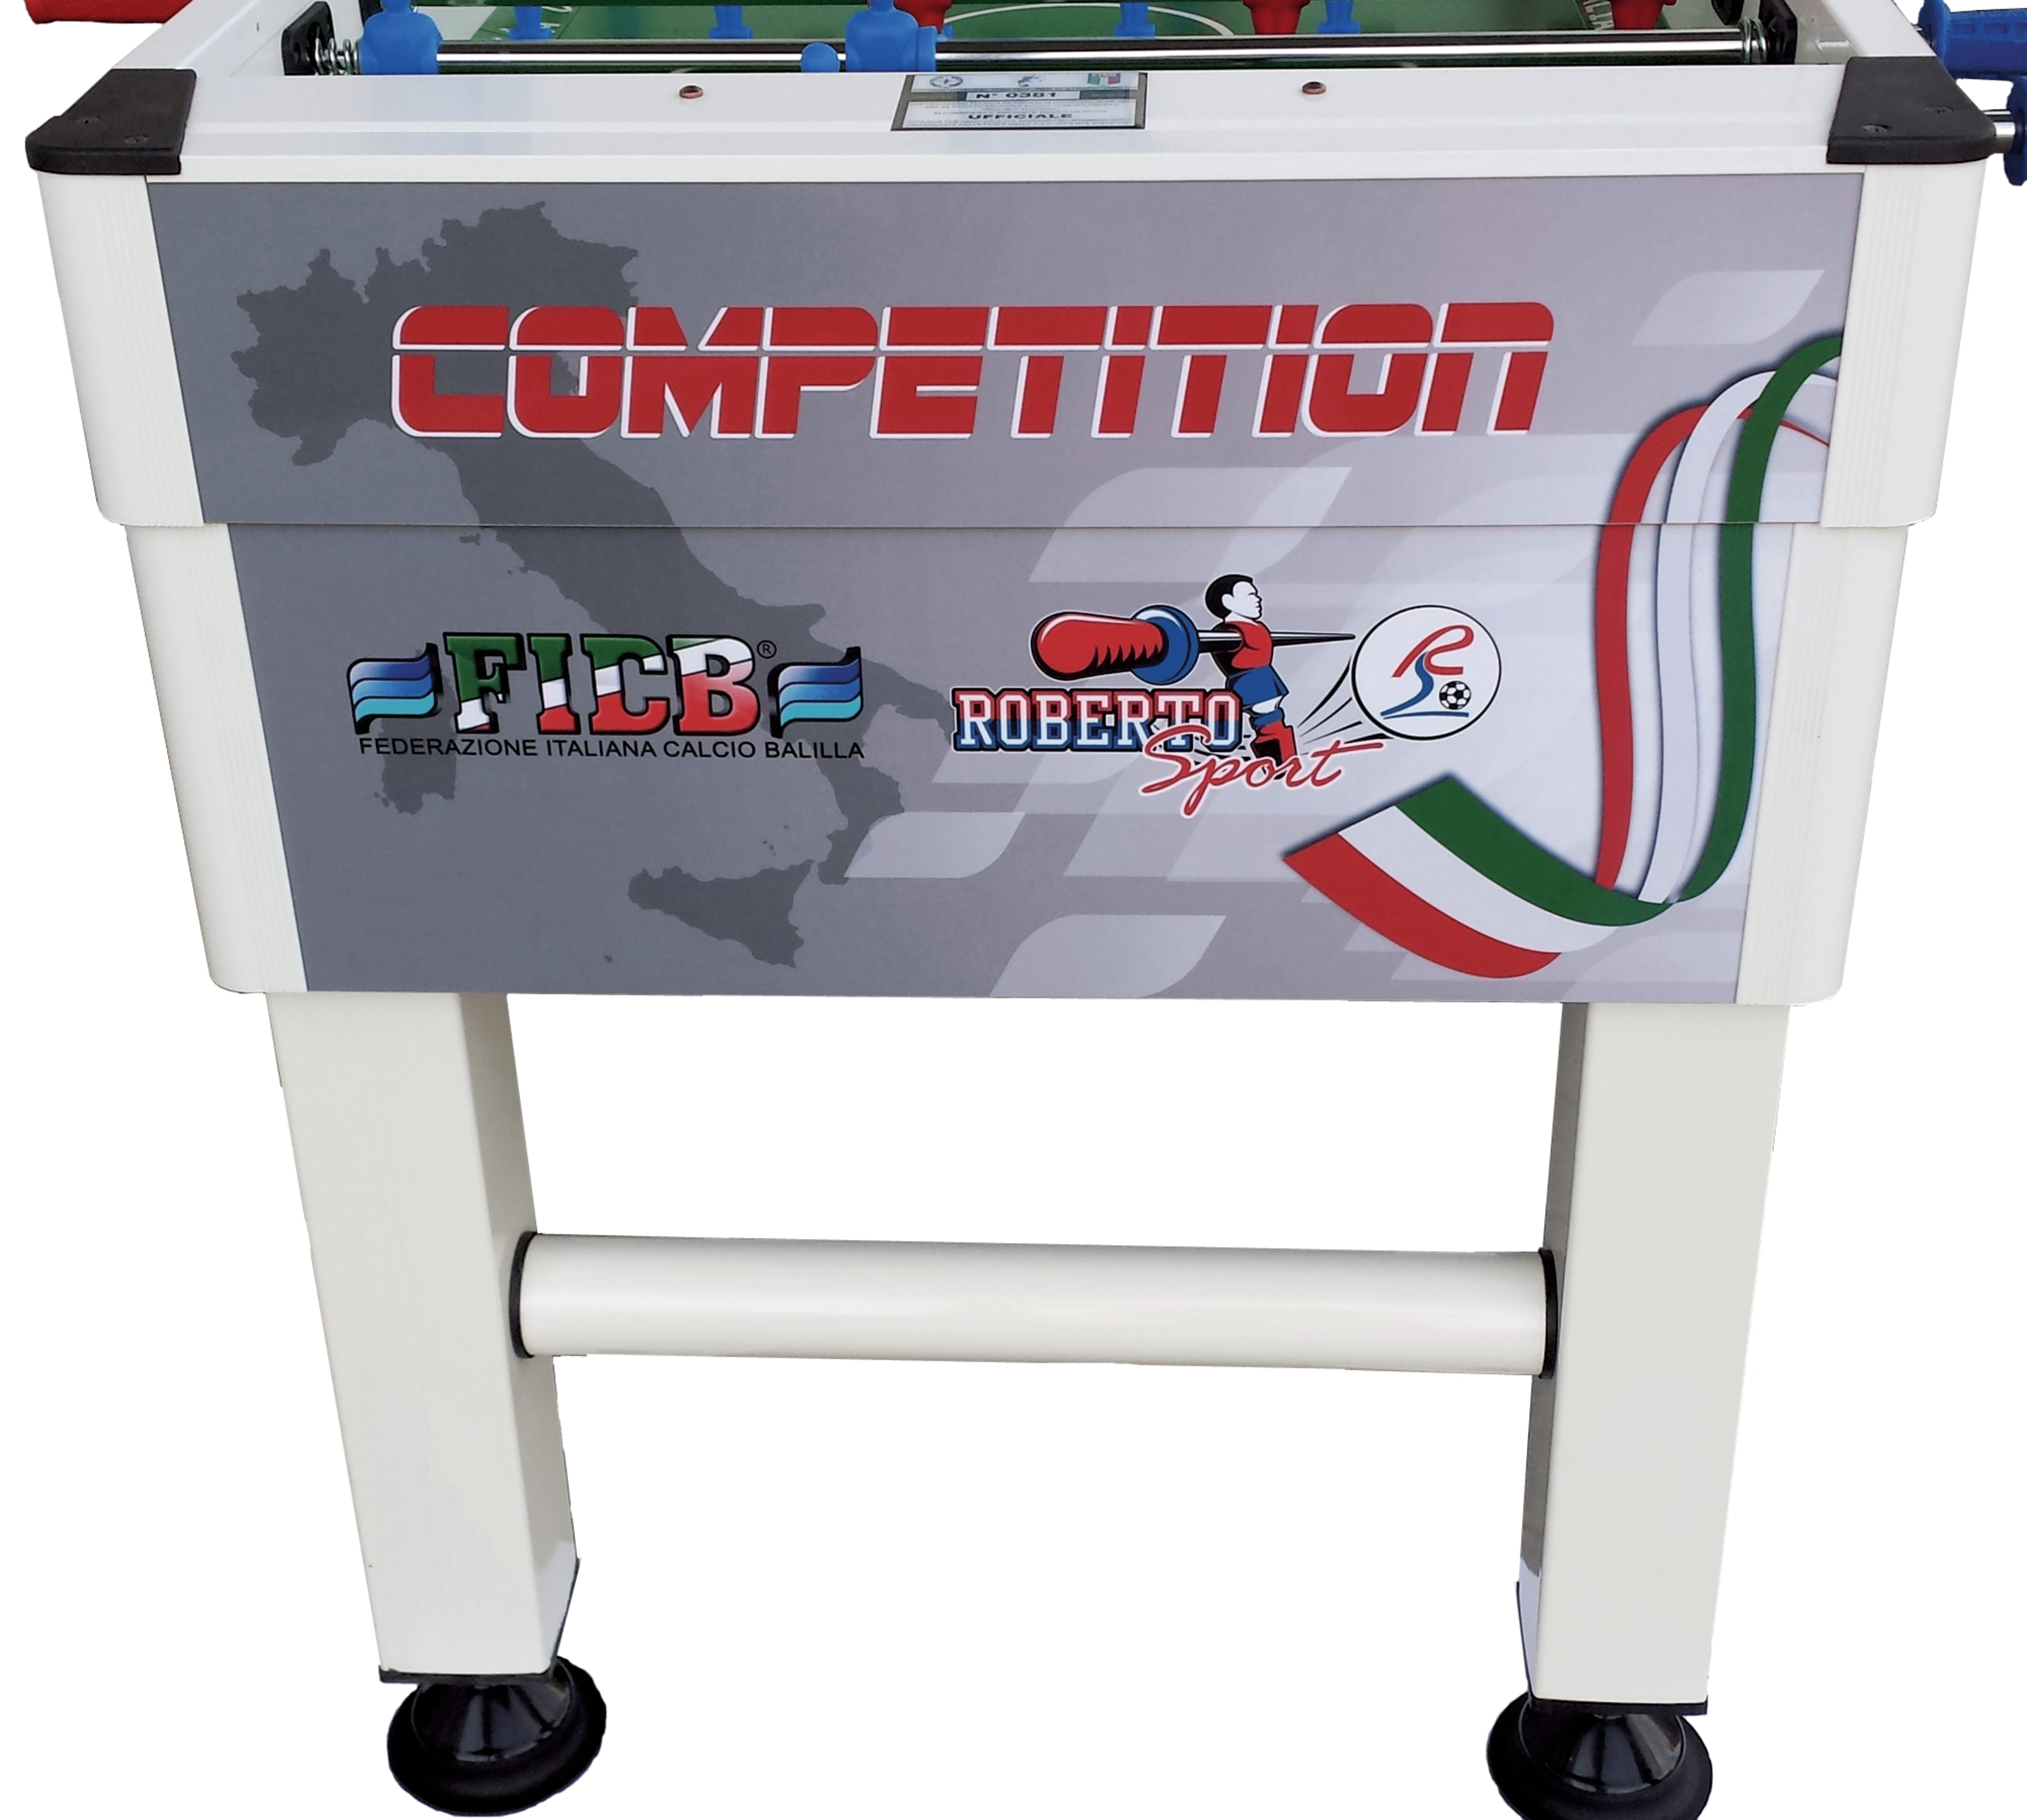 Baby Foot Roberto Sport Competition FICB - Babyfoot Vintage